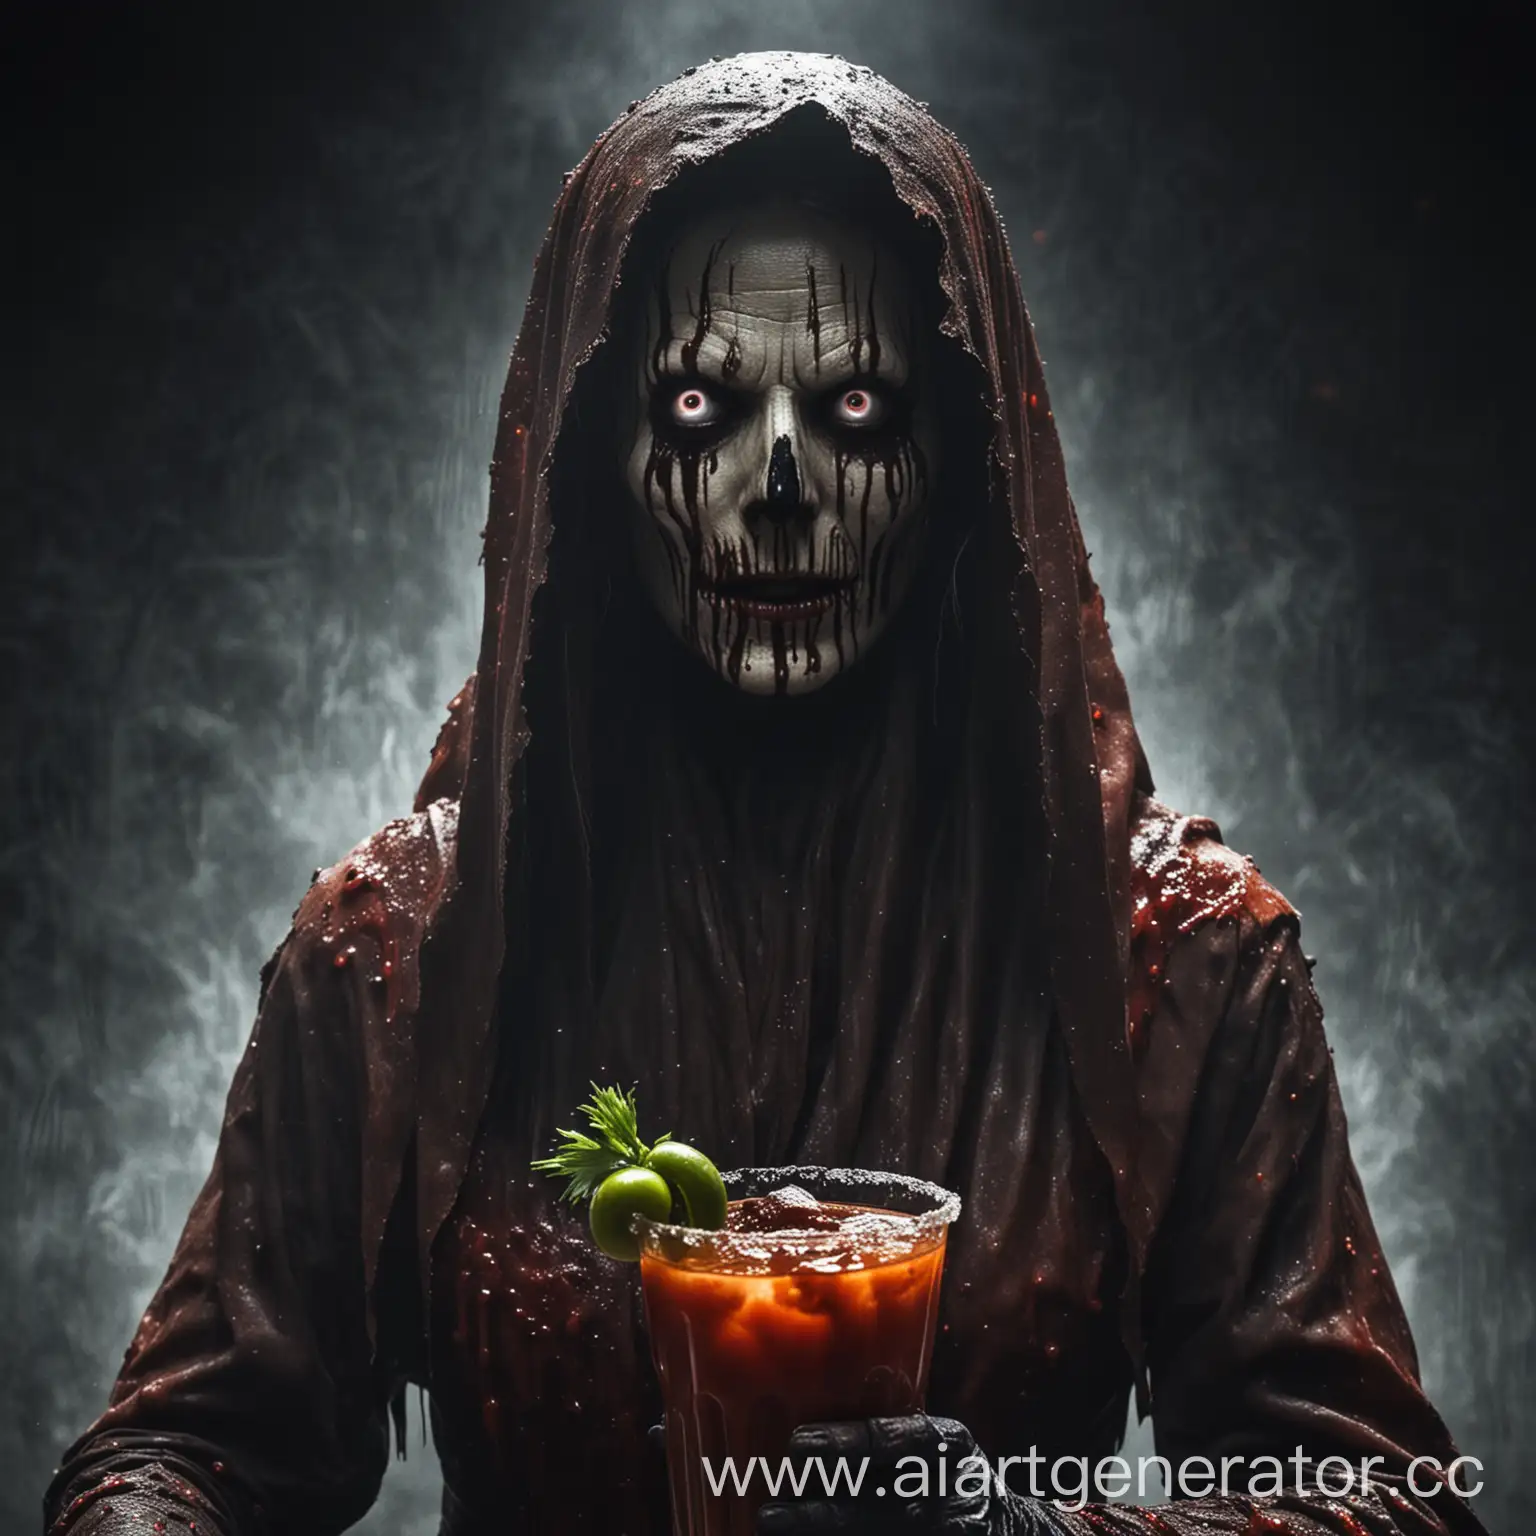 Spooky-Encounter-The-Haunting-Legend-of-Bloody-Mary